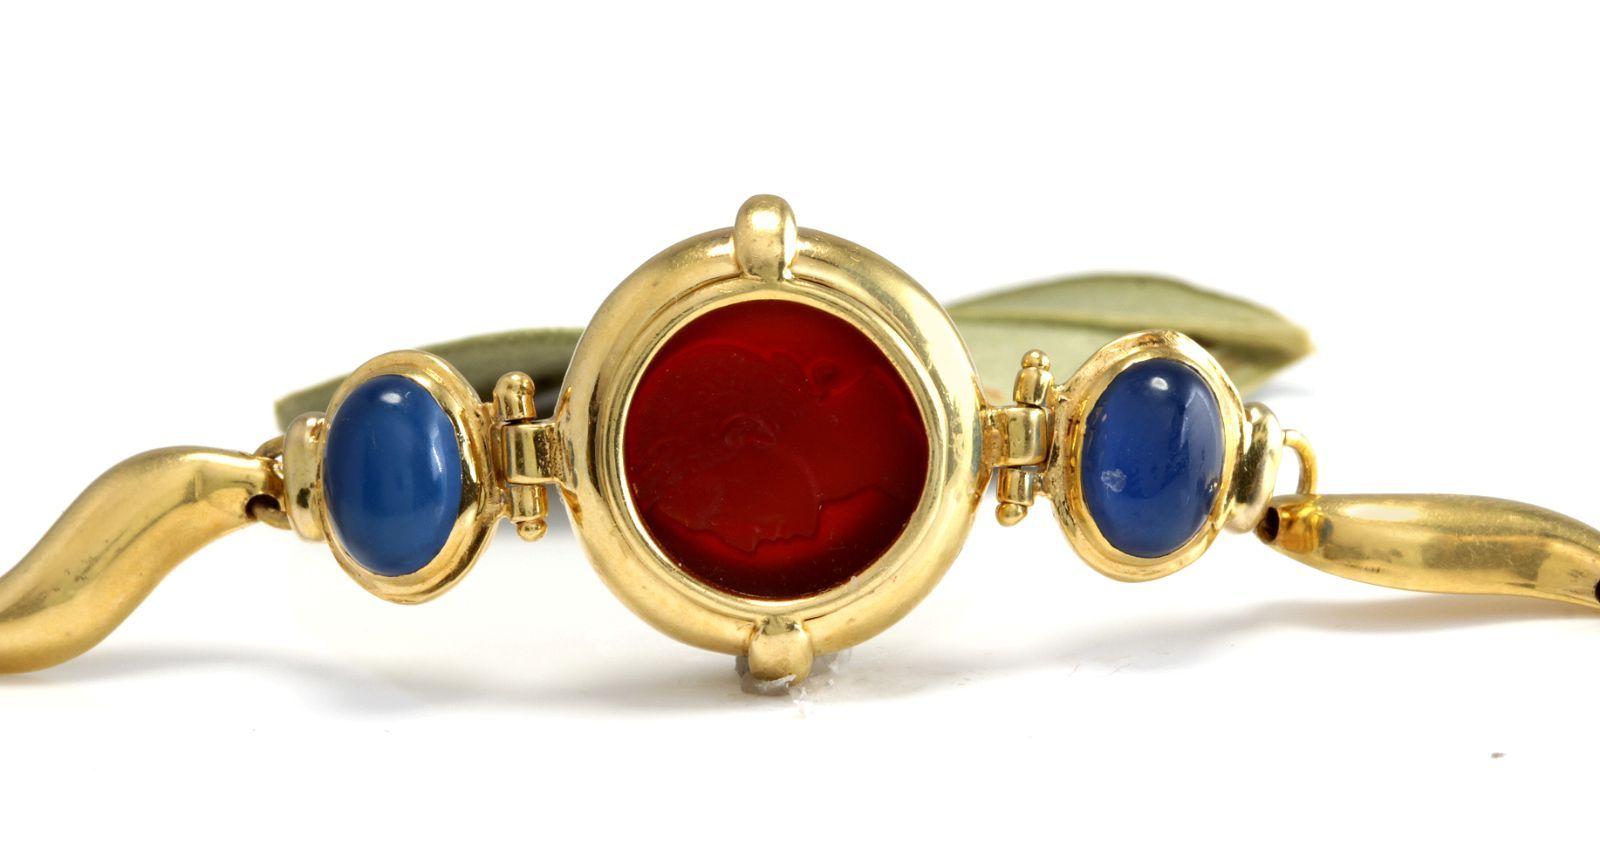 GIROVI Very Impressive Cameo Carnelian Inlay and Sapphire 18K Solid Yellow Gold Designer Bracelet 

Suggested Replacement Value: $9,800.00

STAMPED: 750 (18K)

Two Natural Cabochon Sapphires: 8.76 x 6.40mm

Natural Red Cameo Carnelian Size: